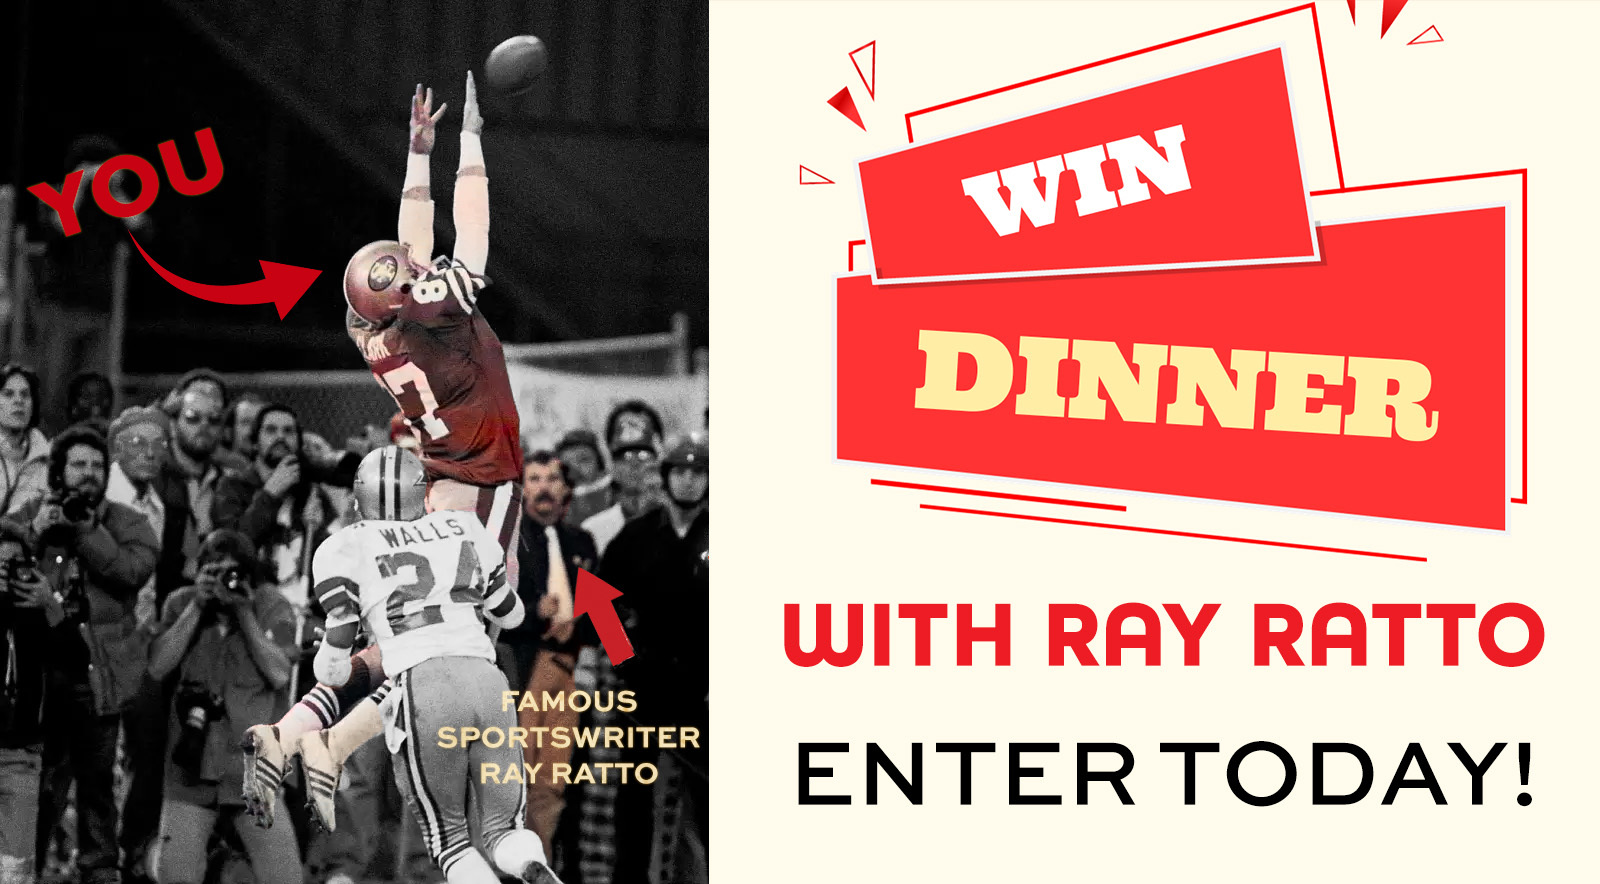 A photo of THE CATCH with Dwight Clark colorized and Ray Ratto colorized as well (he's in the background). On the other side it says "WIN DINNER WITH RAY RATTO - ENTER TODAY!"